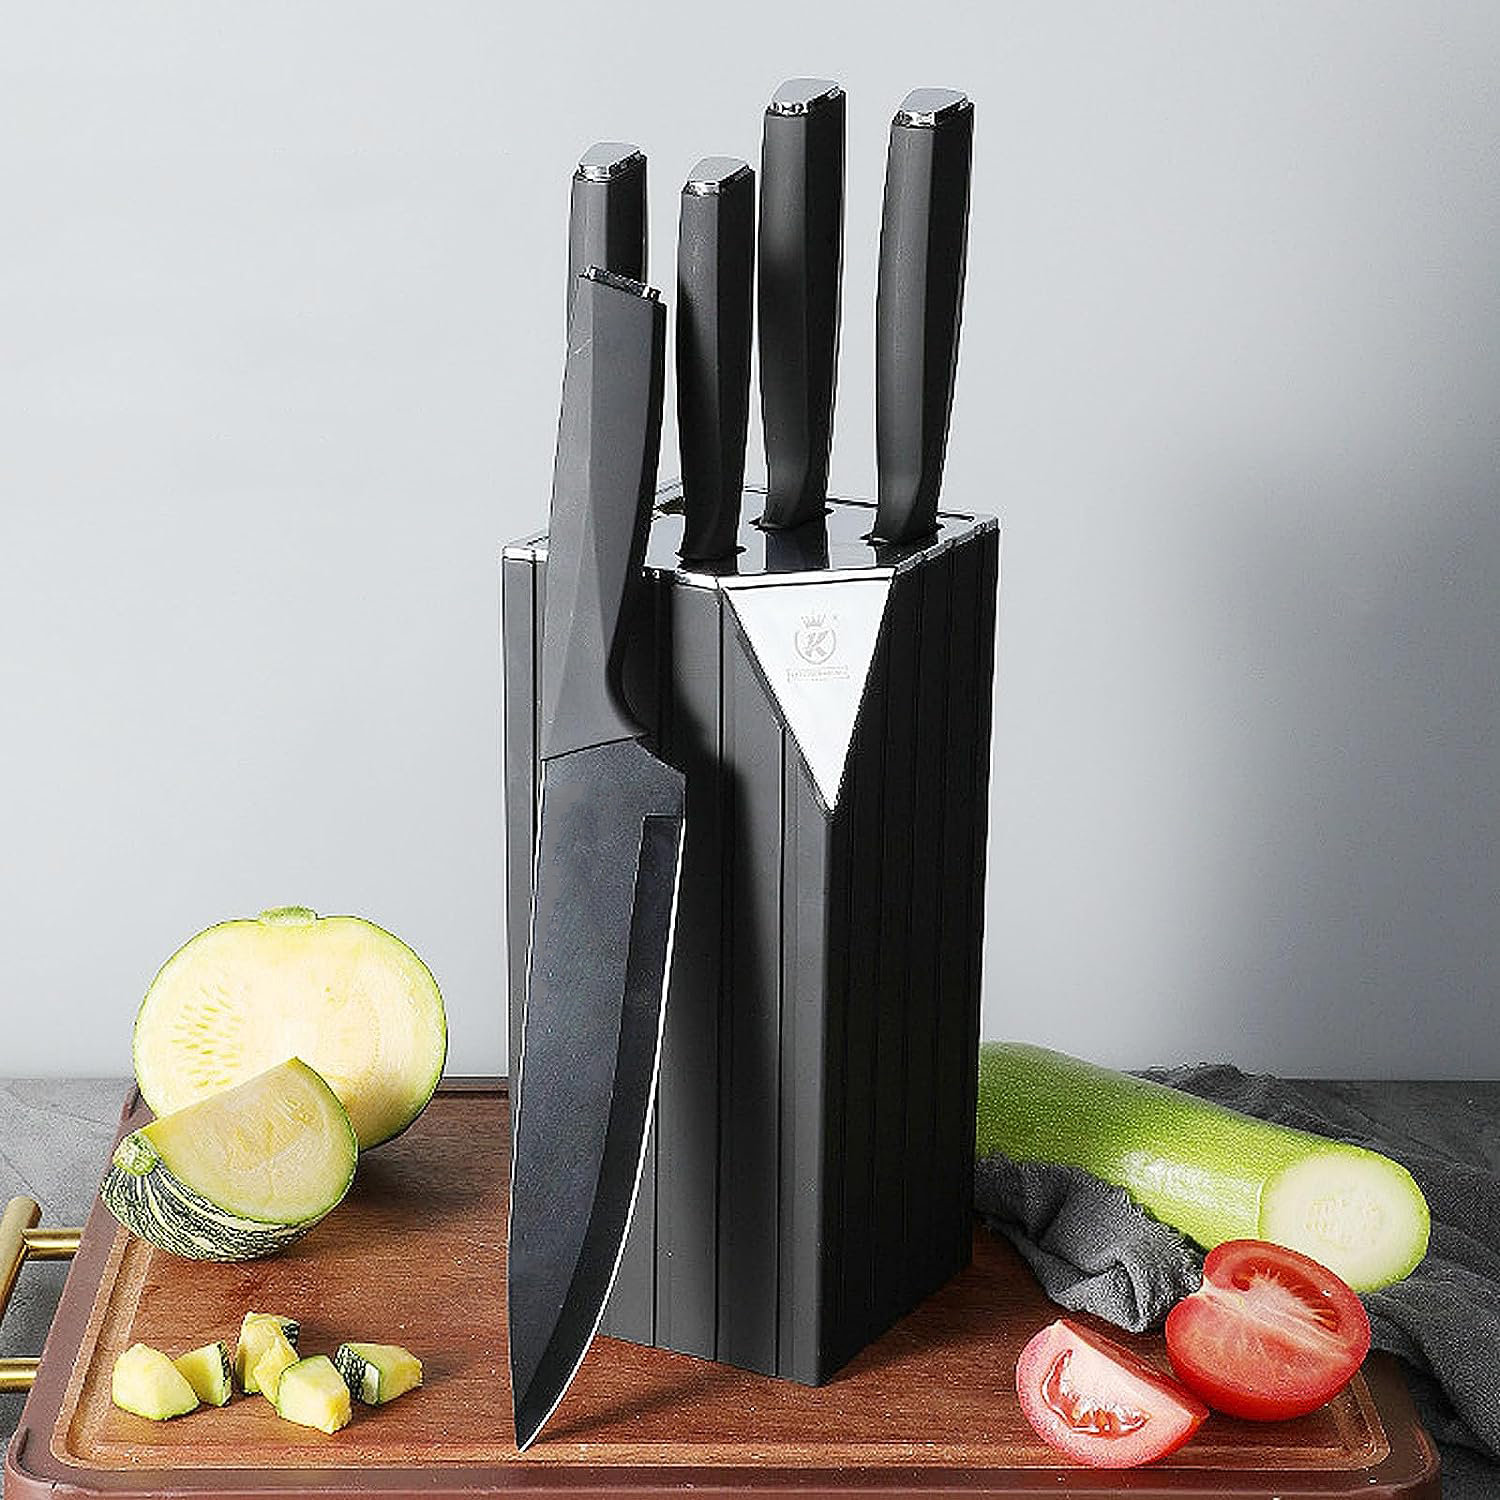 Wuyi 6 Piece High Carbon Stainless Steel Knife Block Set